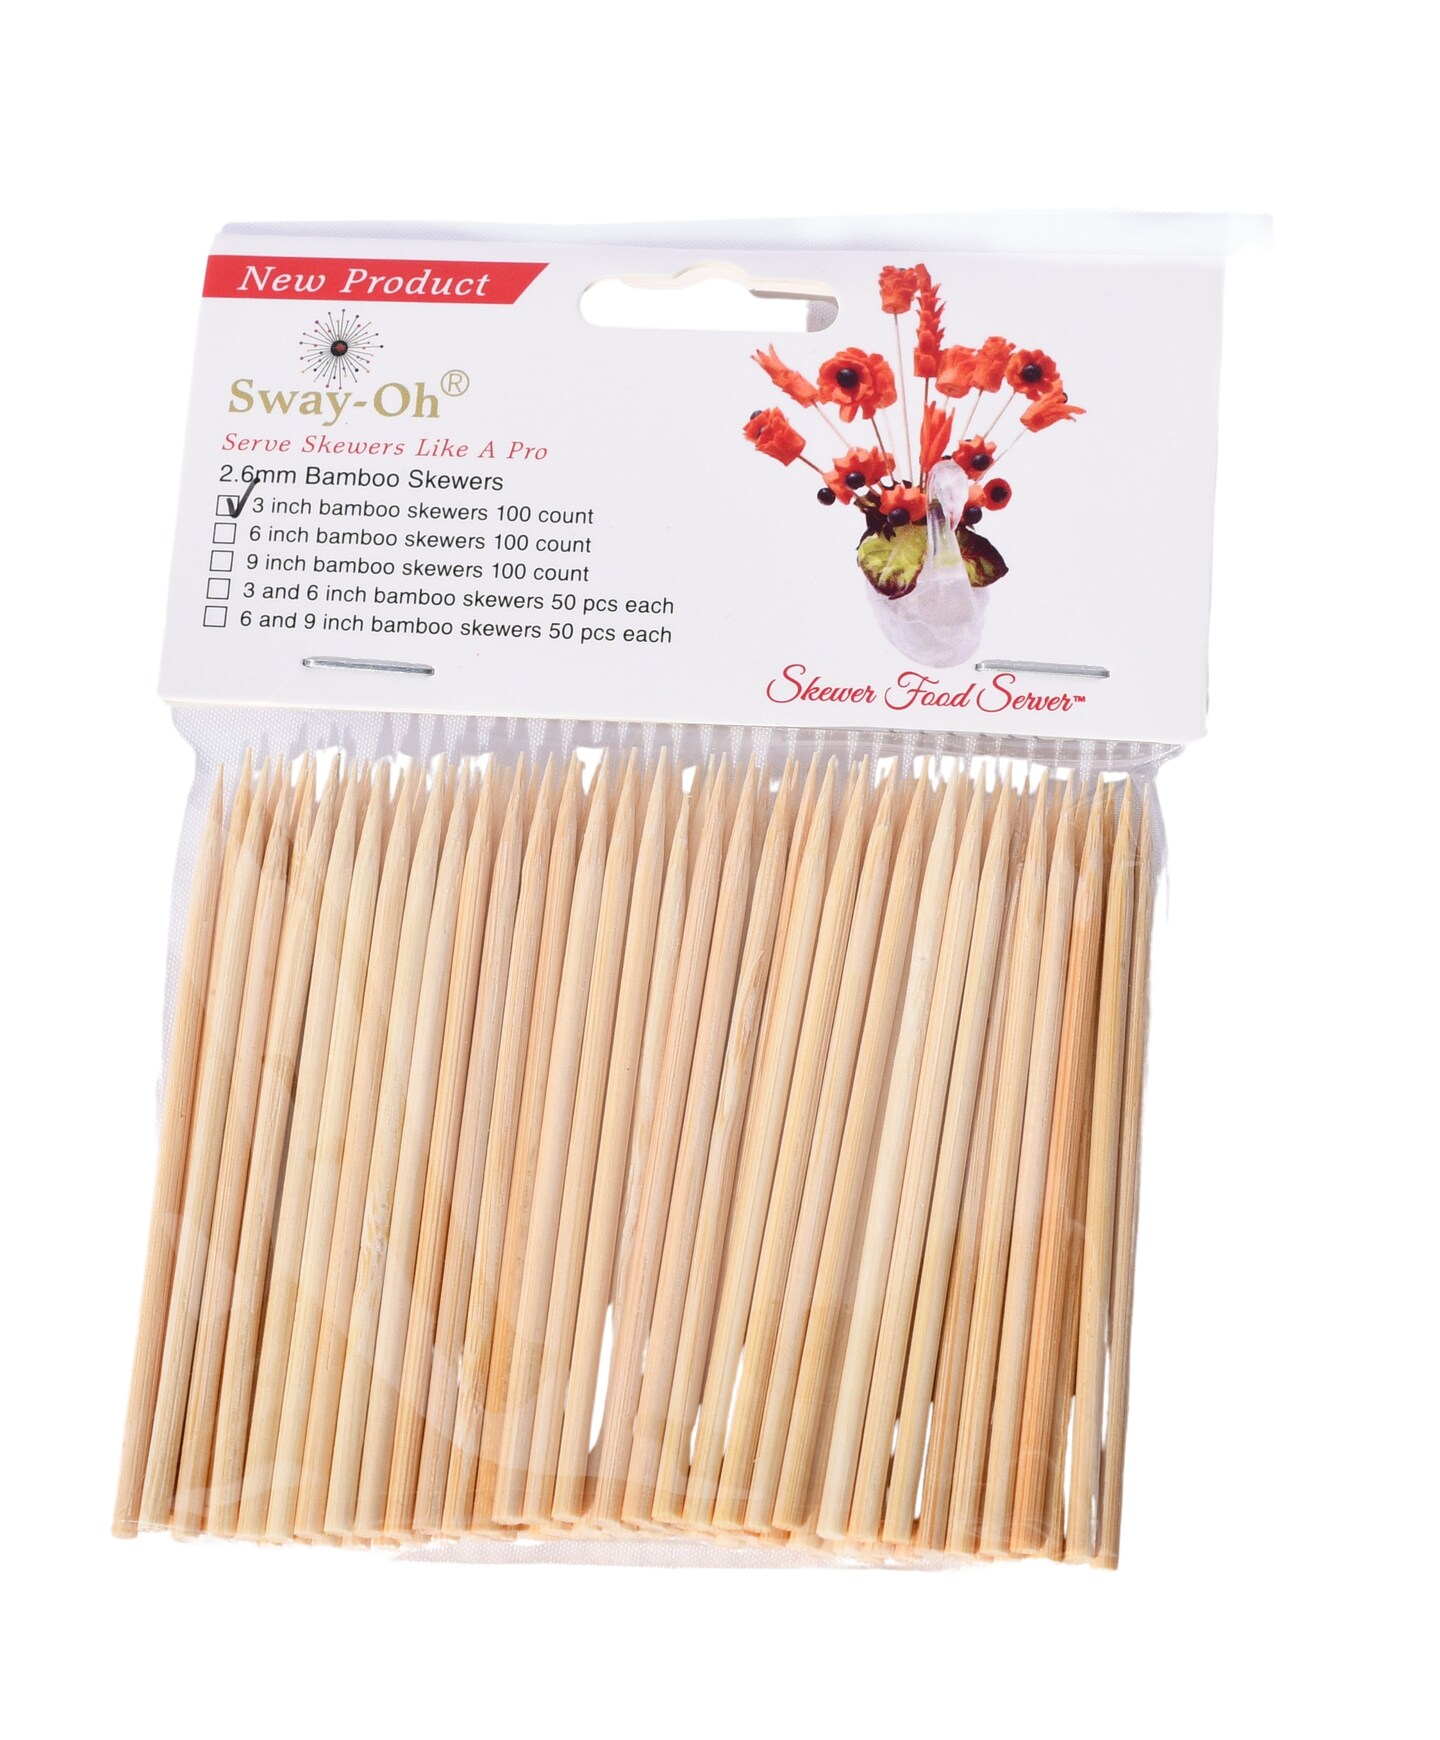 3&#x22; Natural Bamboo Skewers, 100 Count - &#xD8;=2.6mm. Natural Bamboo. Strong, durable, bamboo skewers to display bite-sized fruits, vegetables, meats, cheese, desserts, and other appetizers.